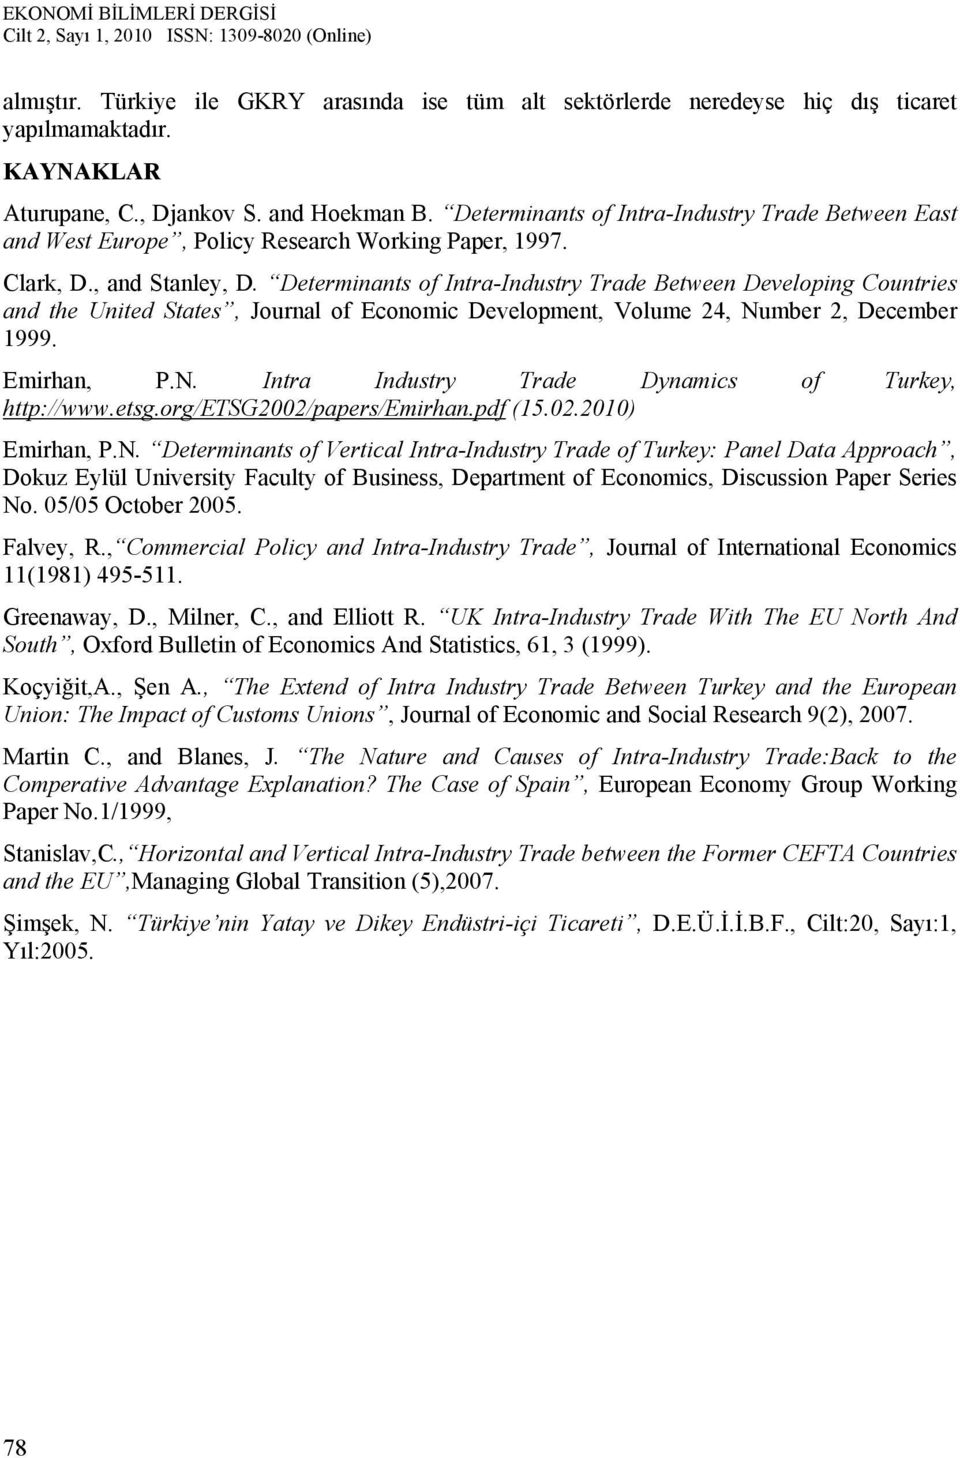 Determinants of Intra-Industry Trade Between Developing Countries and the United States, Journal of Economic Development, Volume 24, Number 2, December 1999. Emirhan, P.N. Intra Industry Trade Dynamics of Turkey, http://www.